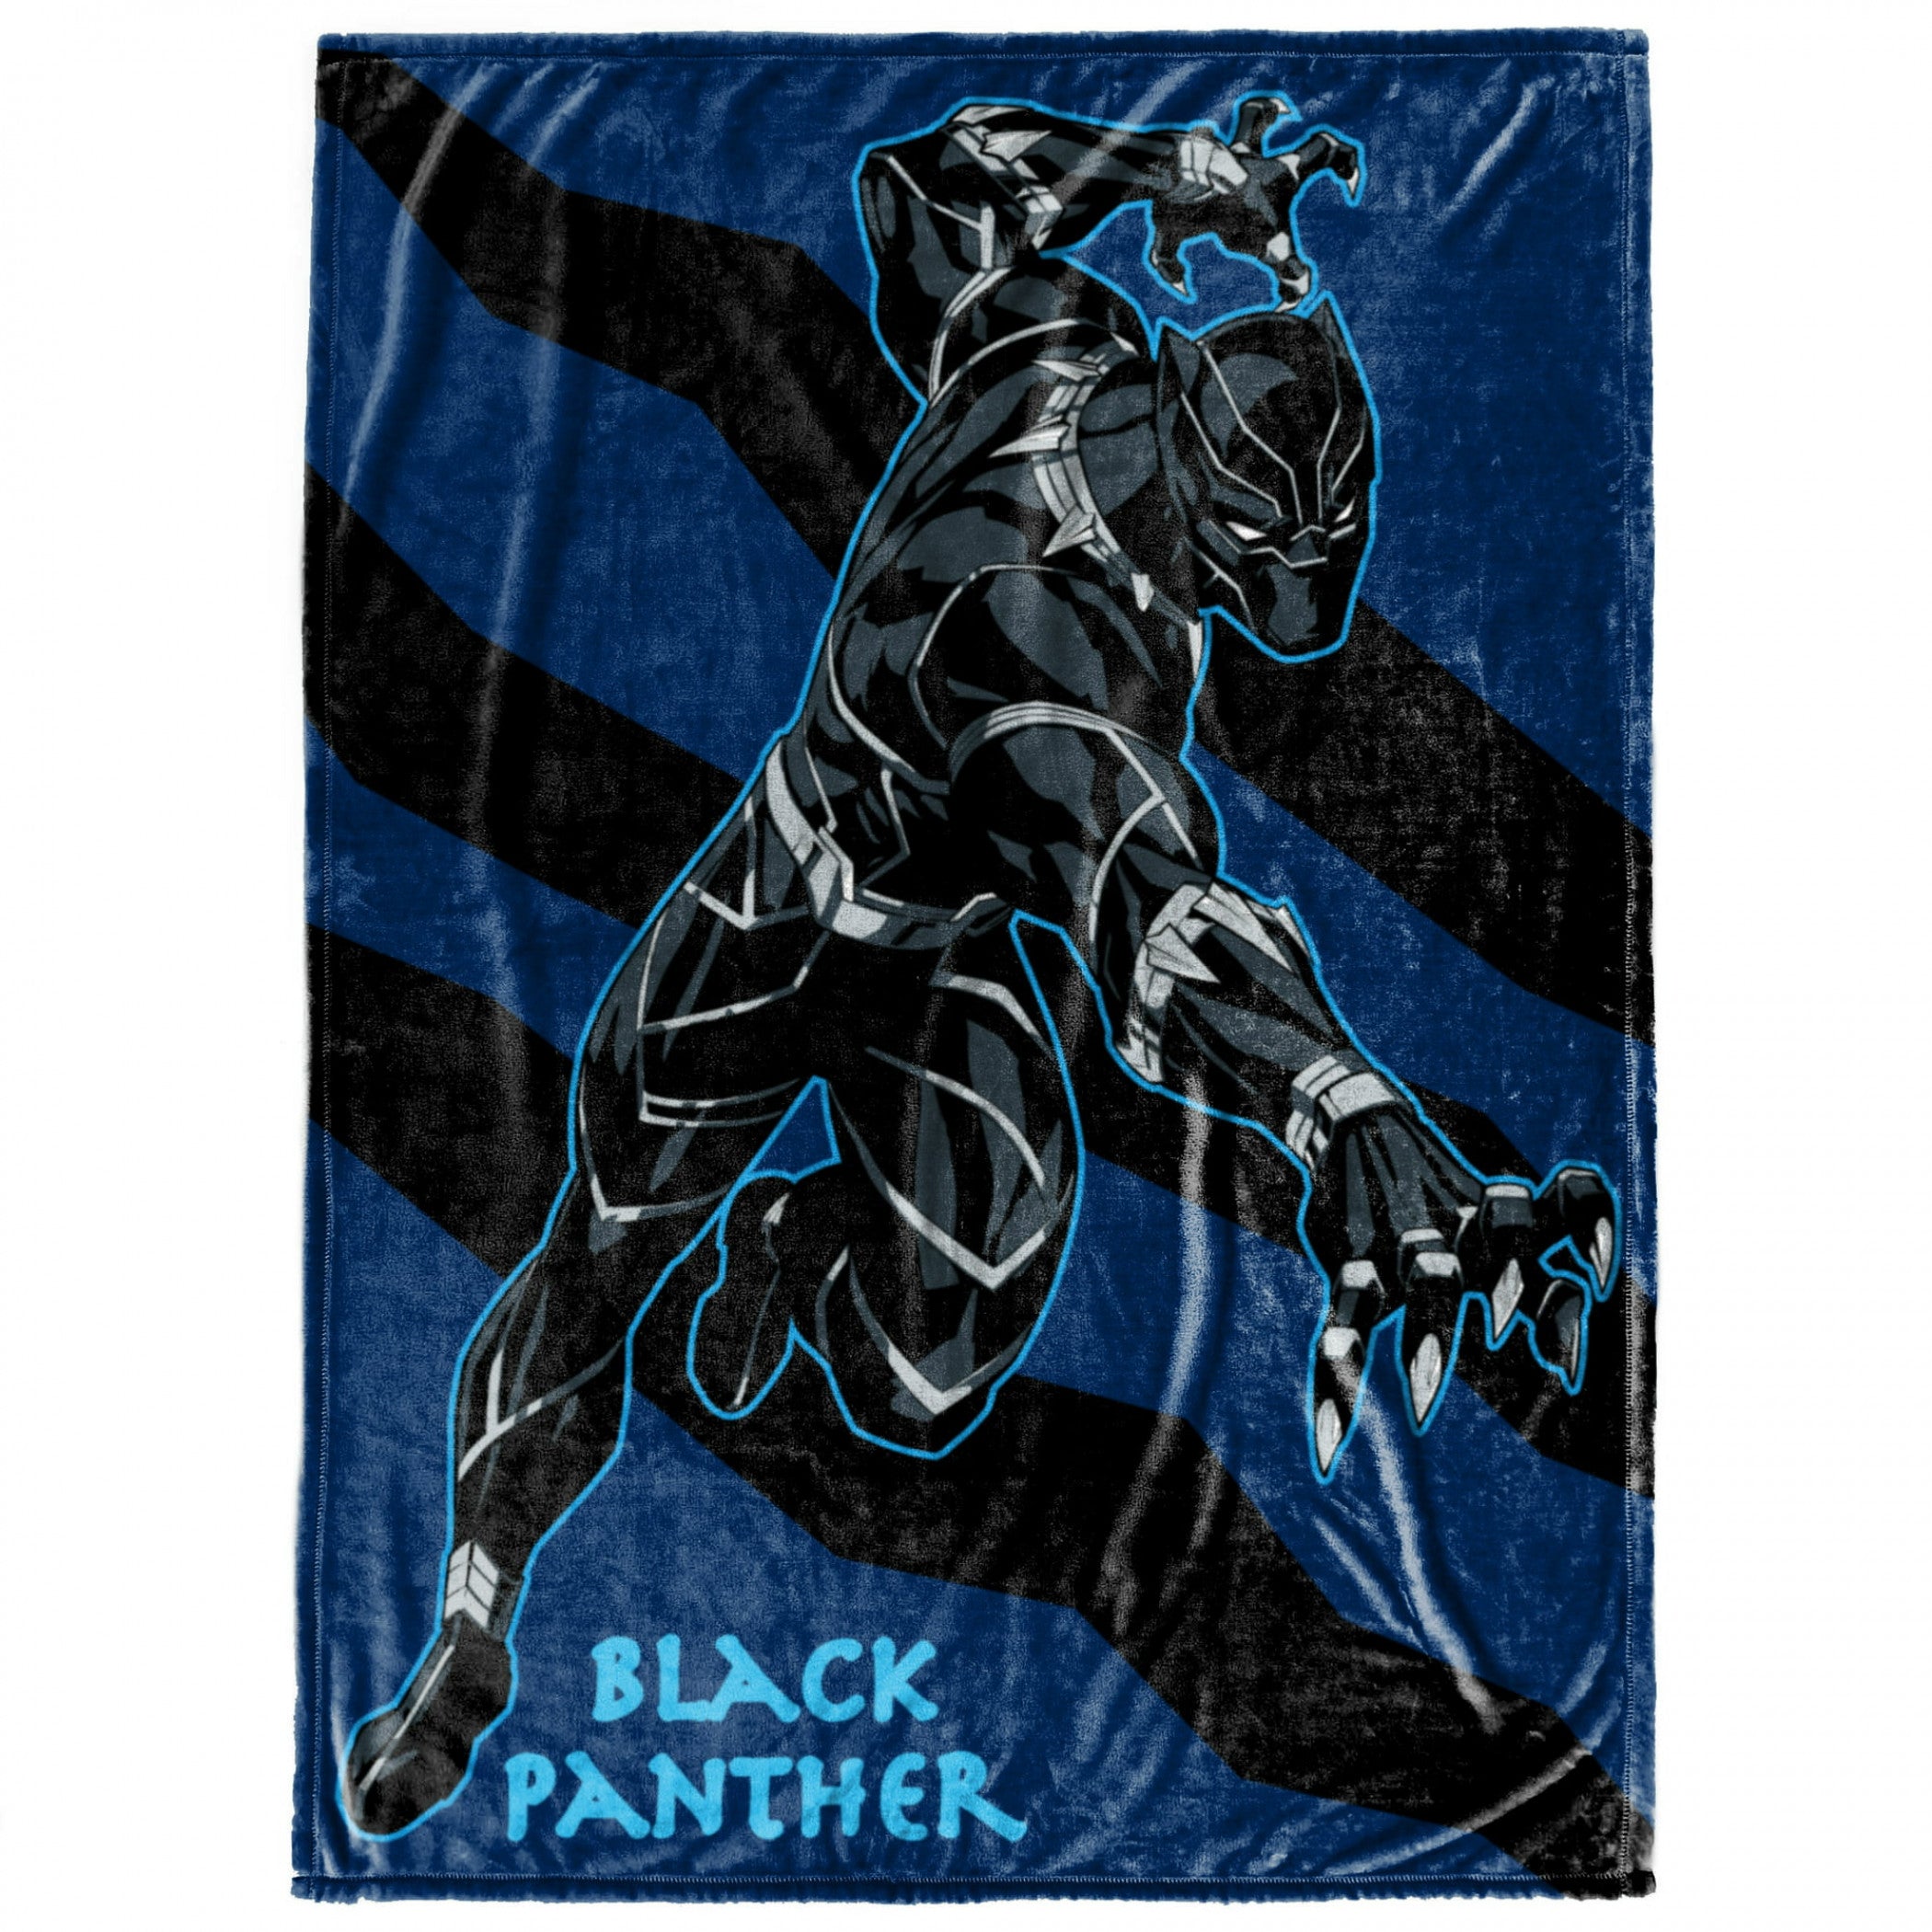 Black Panther Claws Out 46" X 60" Throw Blanket